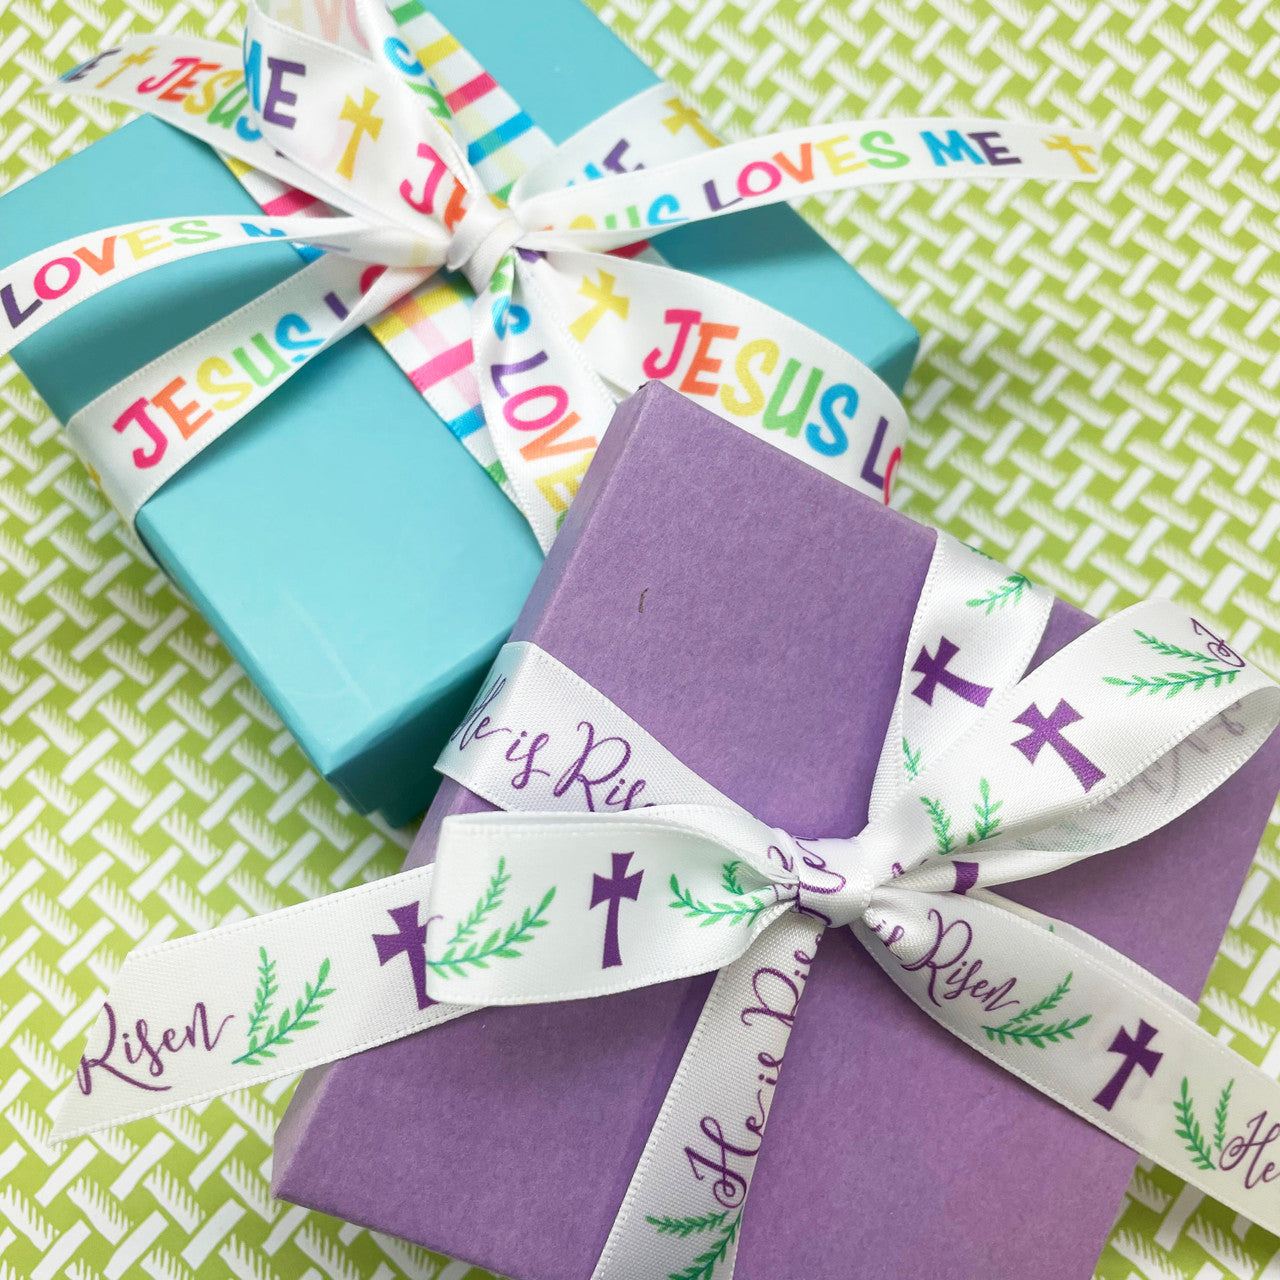 Our Christian themed ribbons are perfect for Sunday school gifts and favors along with services and ceremonies! Ch